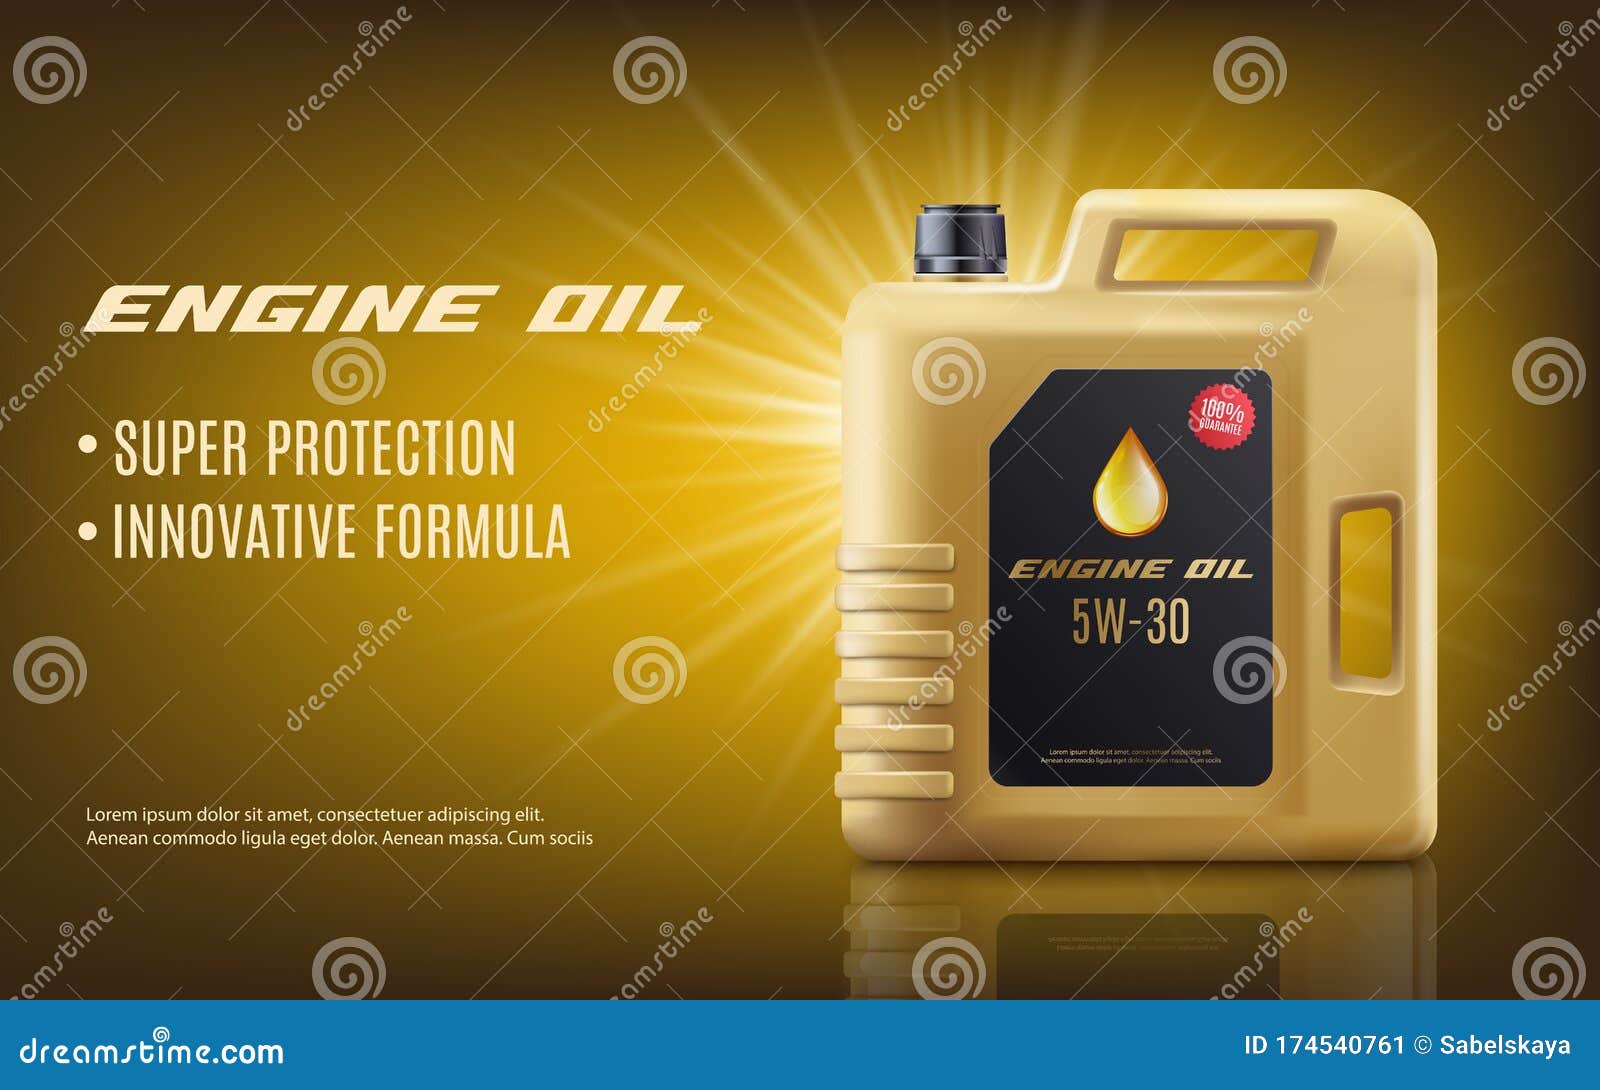 Download Engine Oil Ad Poster Mockup With Realistic Golden Machine ...